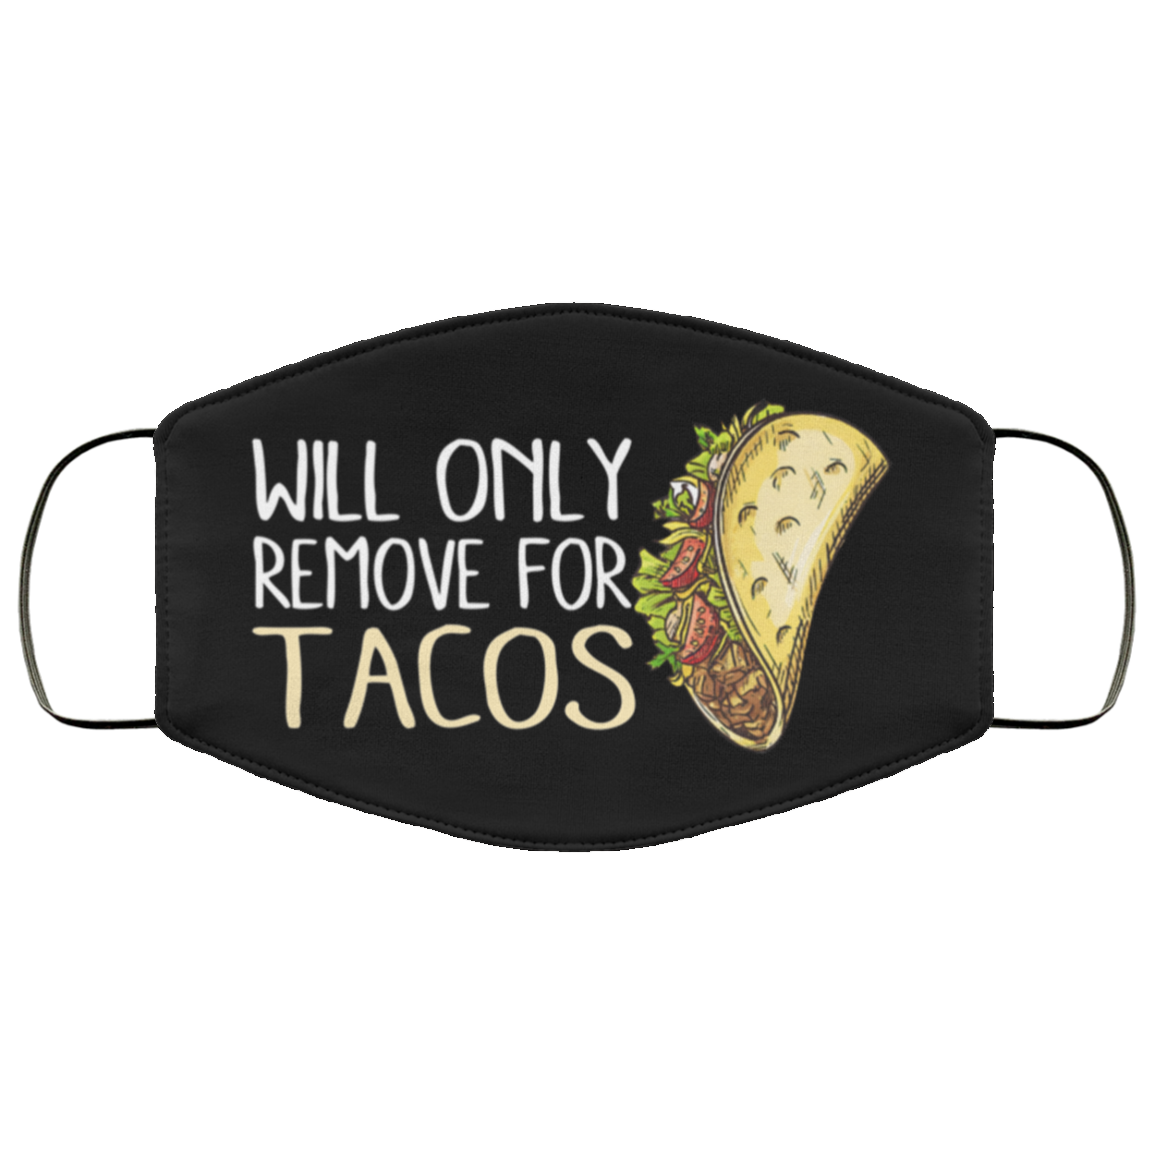 Will only remove for tacos Fabric face mask – TAGOTEE